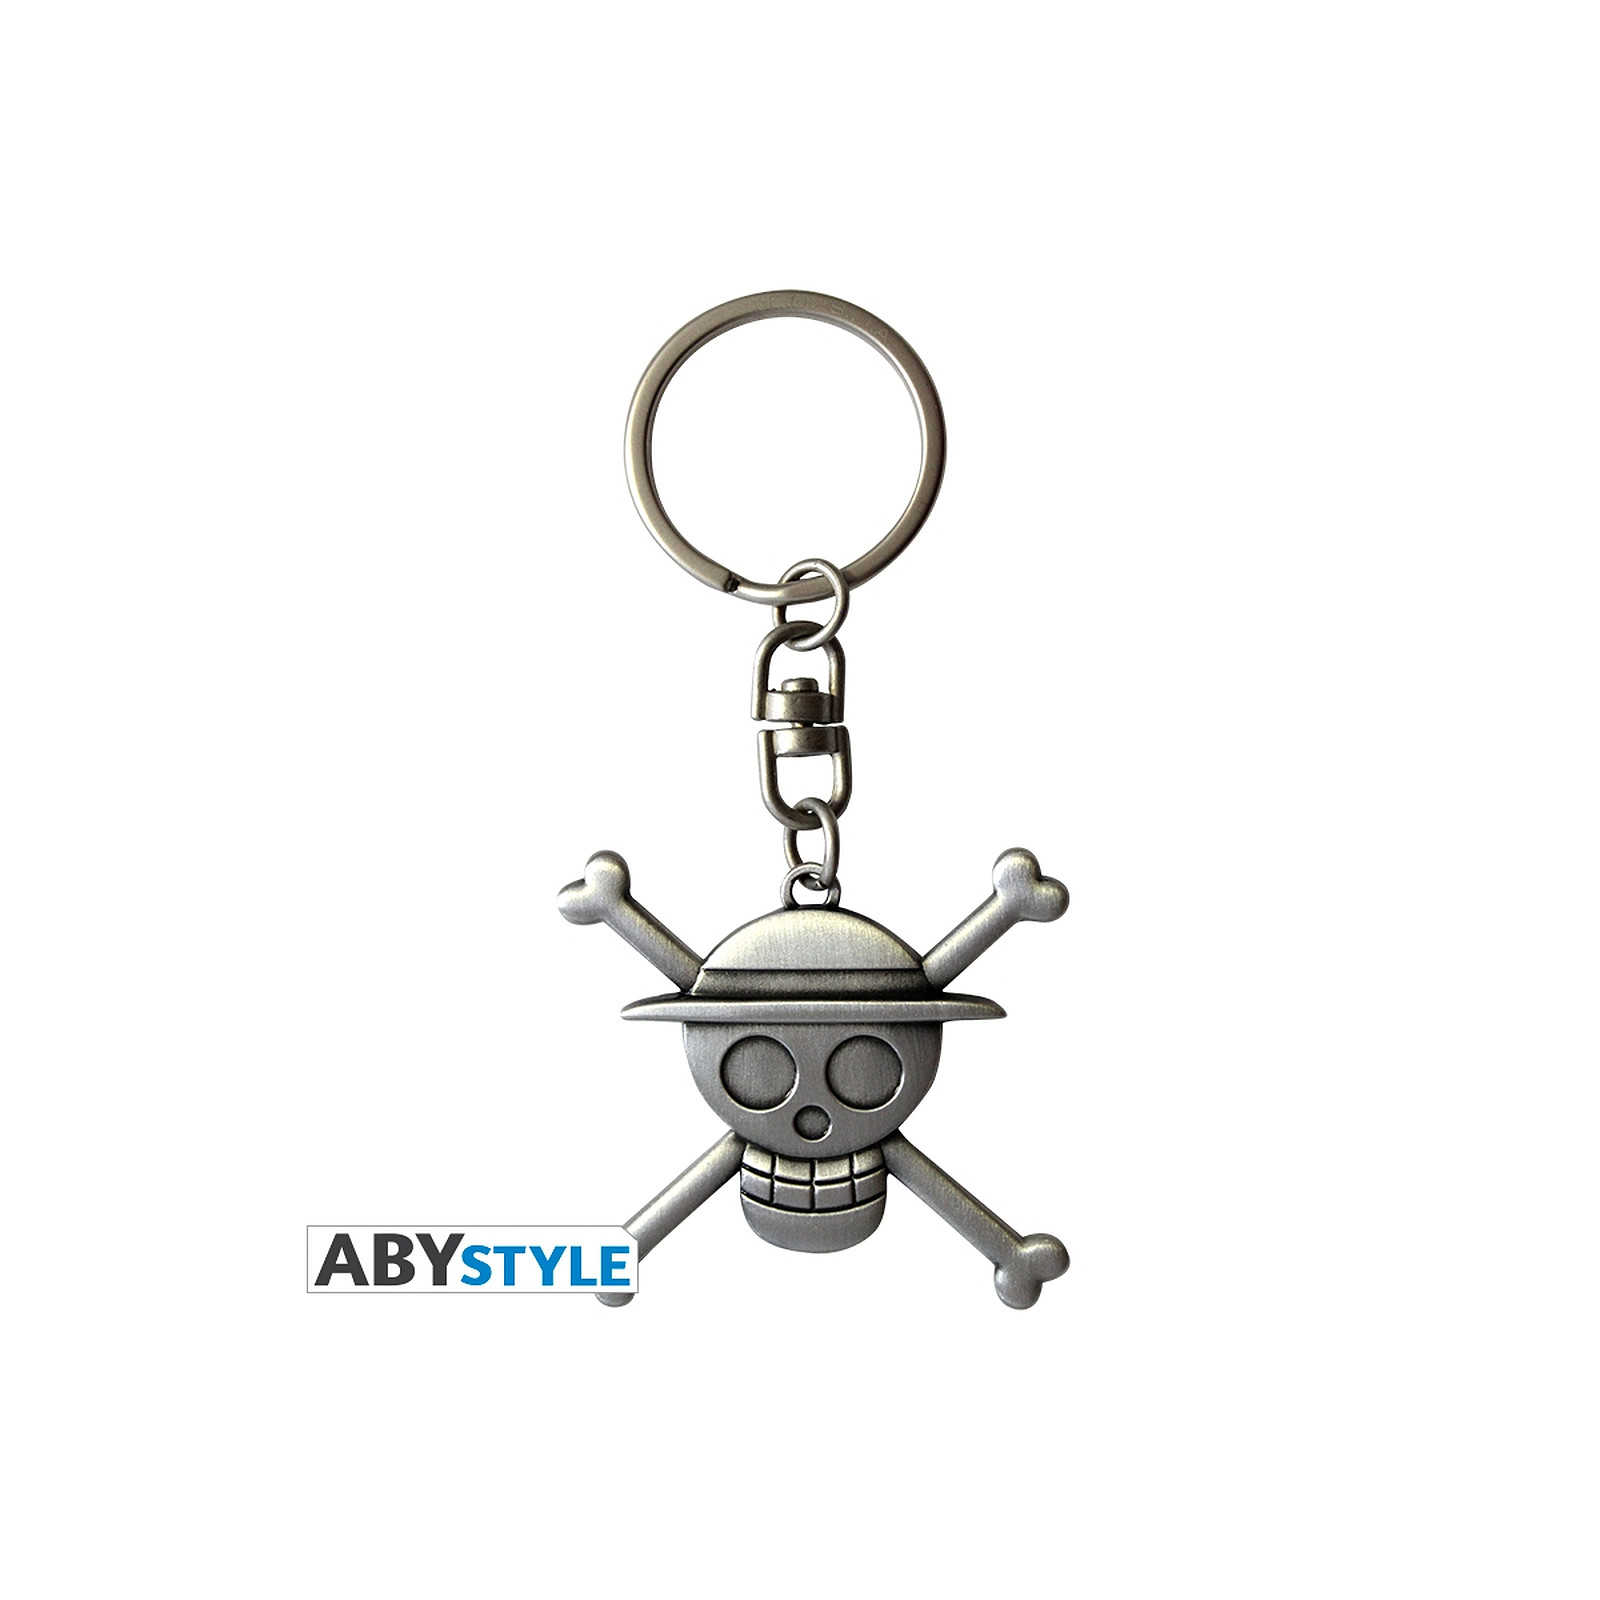 One Piece - Porte-cles 3D Skull Luffy - Porte-cles Abystyle